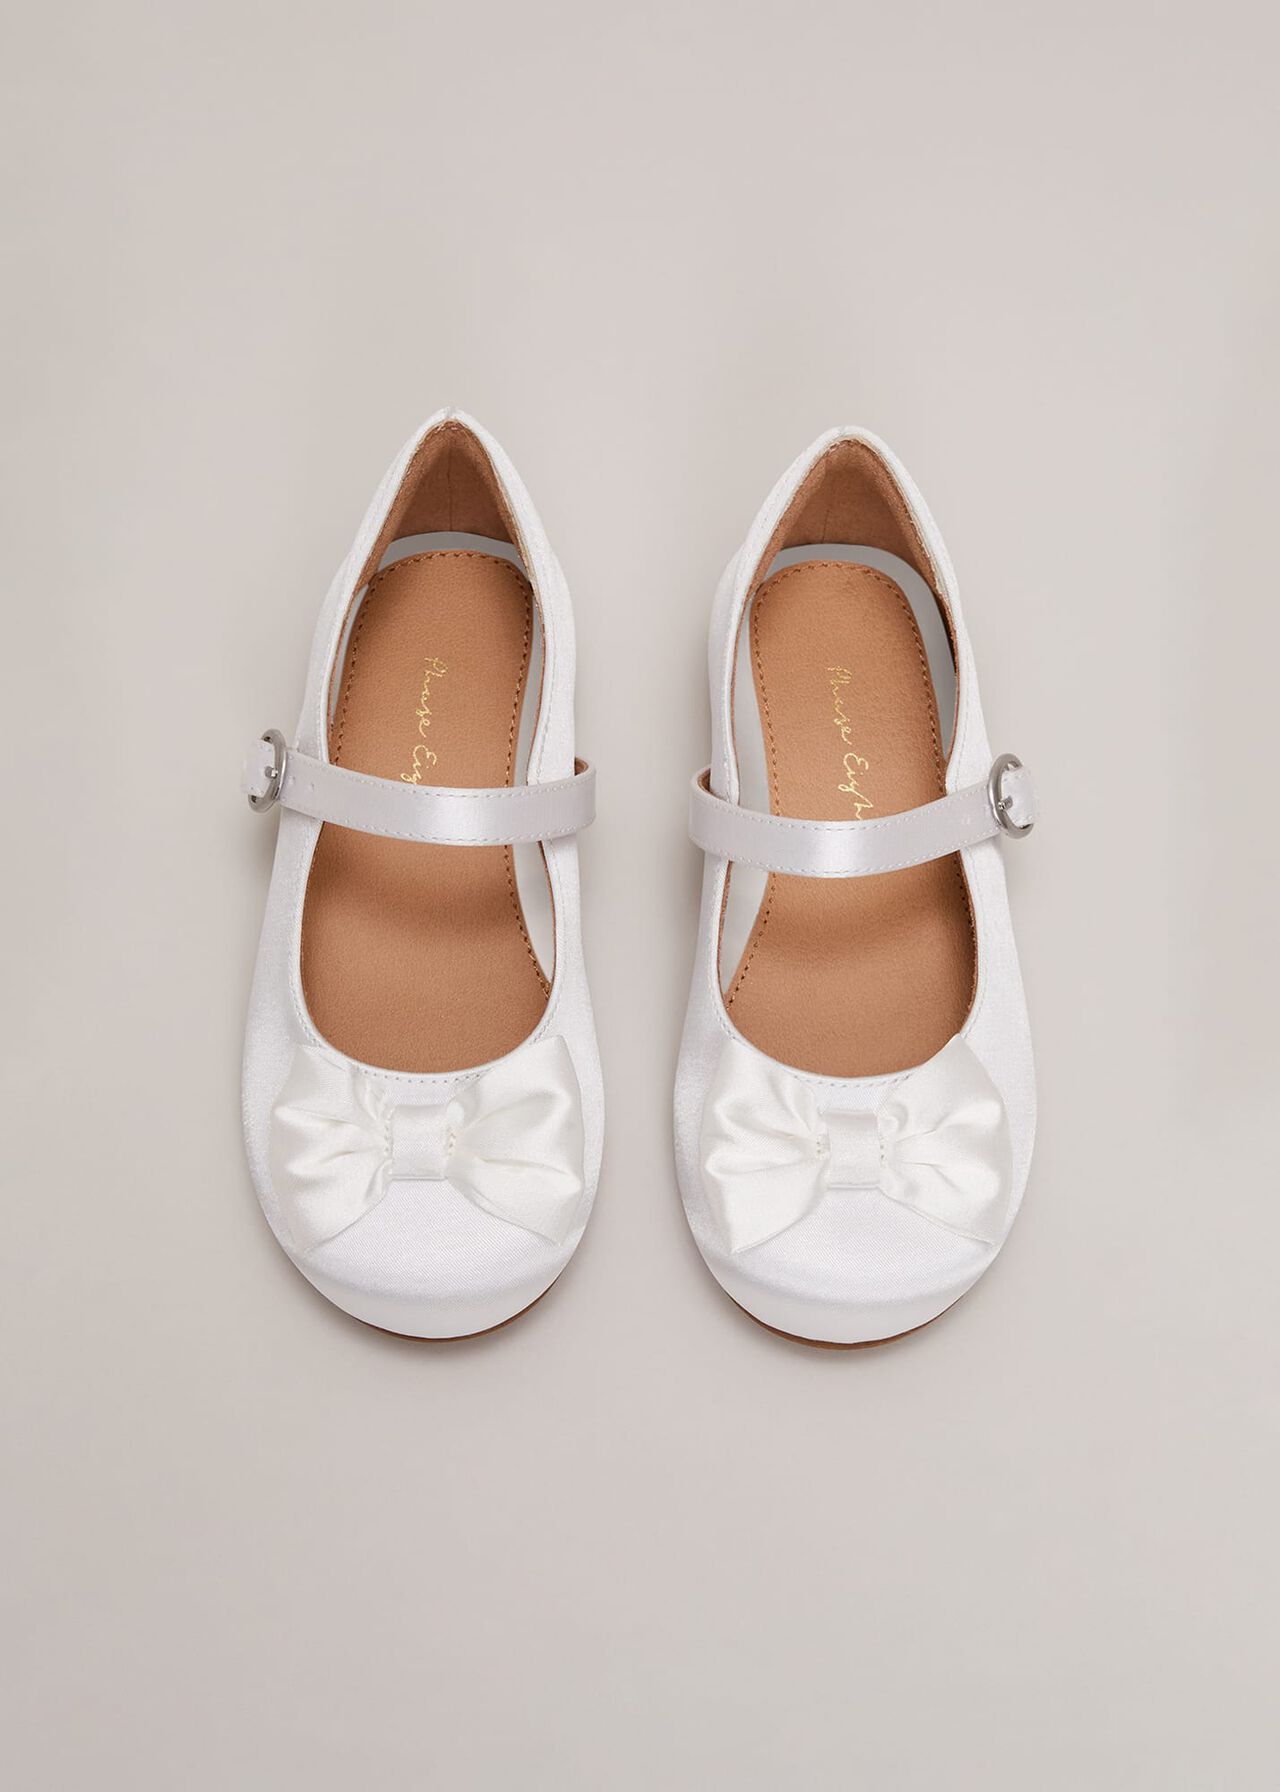 Satin Bow Front Shoes